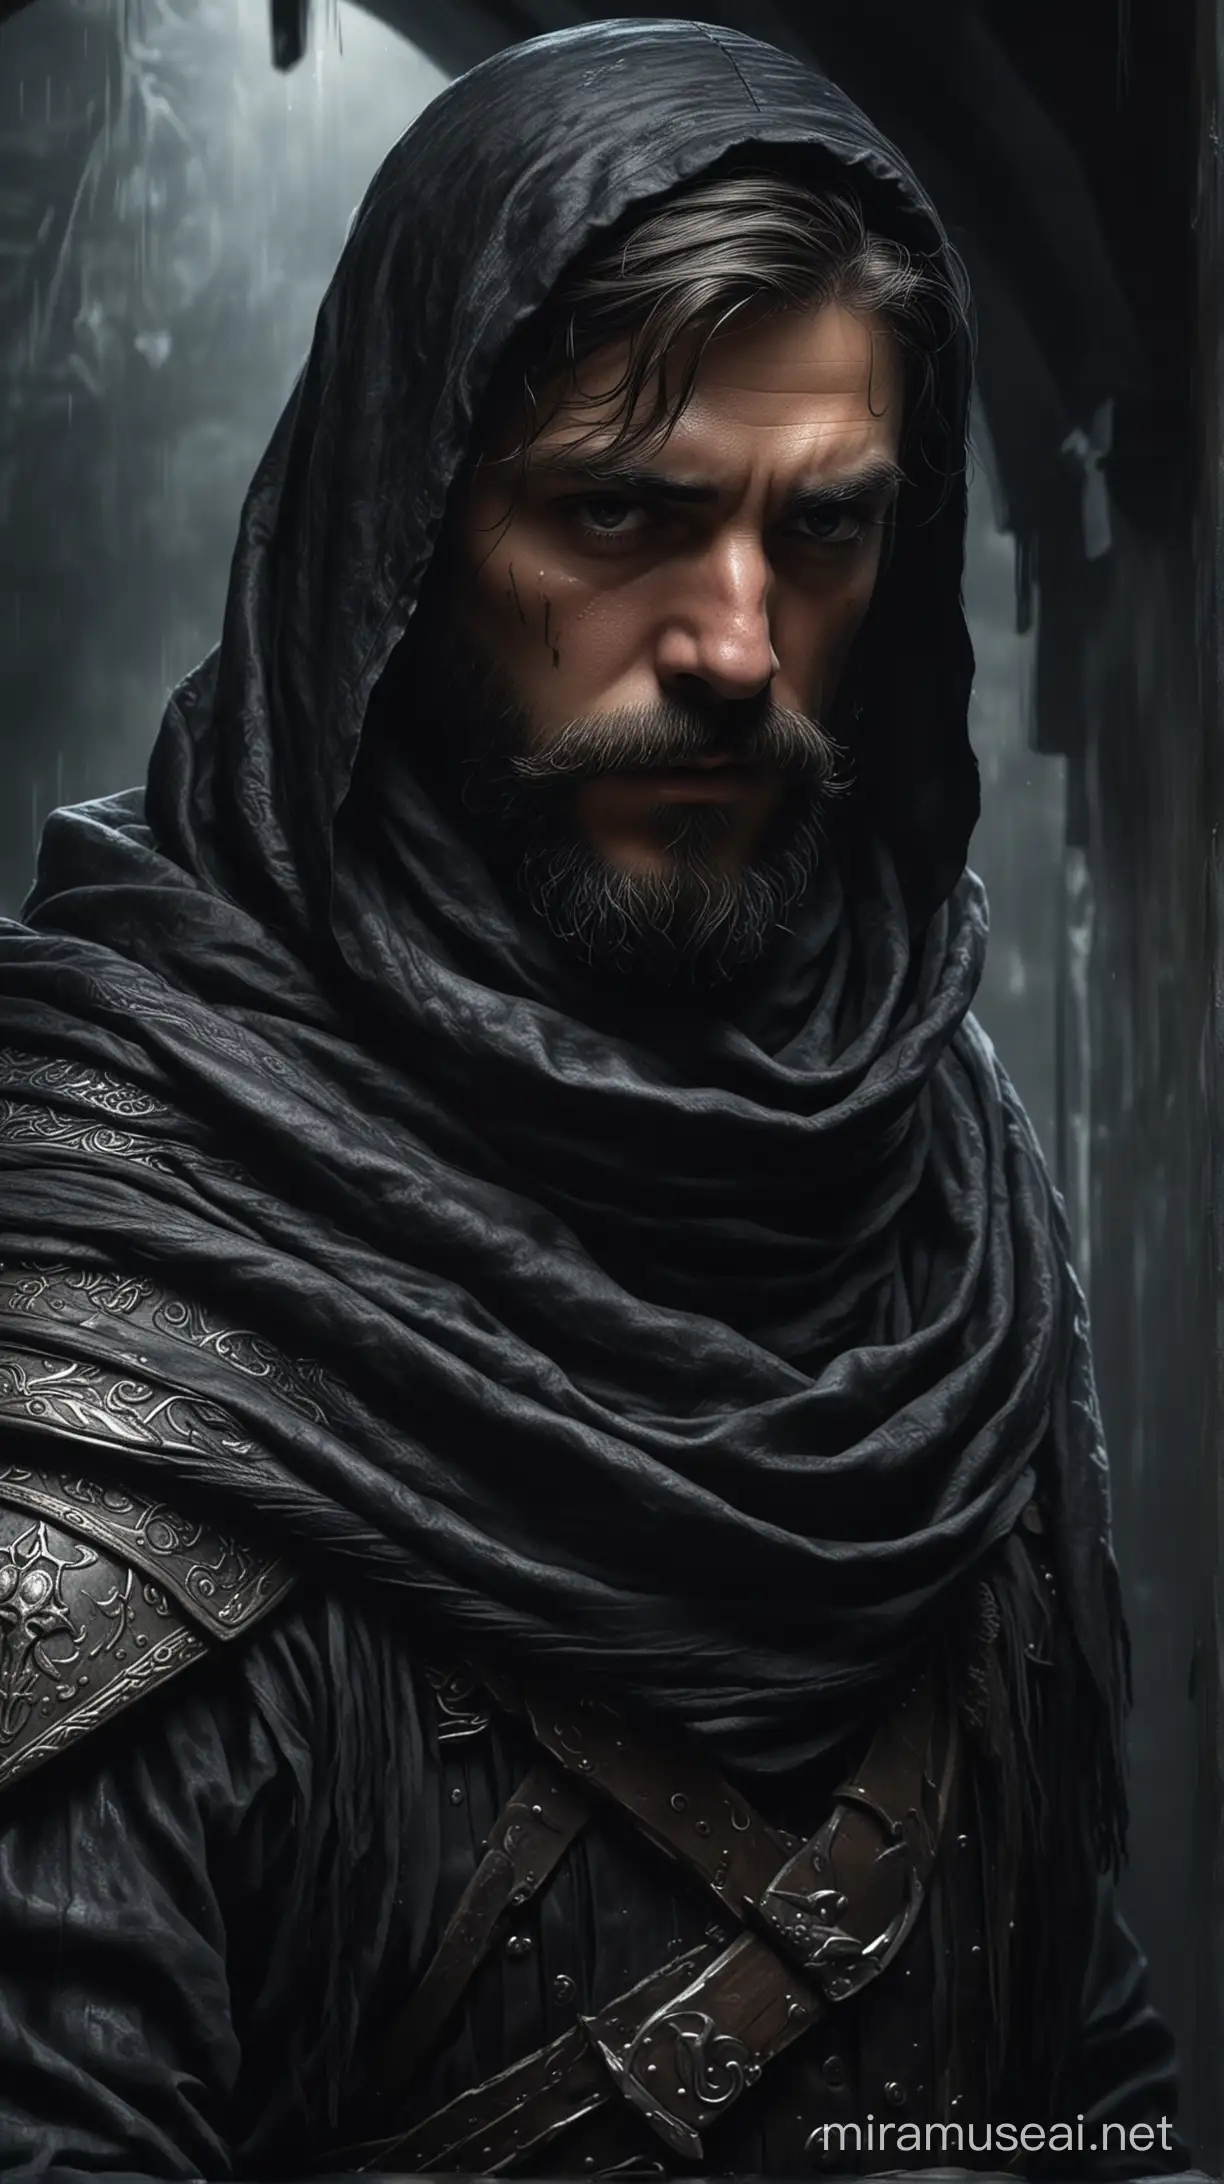 Medieval warrior clad in black battle attire, standing in his dark  house that made up of glass, conceals head with a black scarf, his medium beard and mustache prominently displayed, foregrounded by a close-up, heightened tension, digital painting, ultra fine details, atmospheric mood.